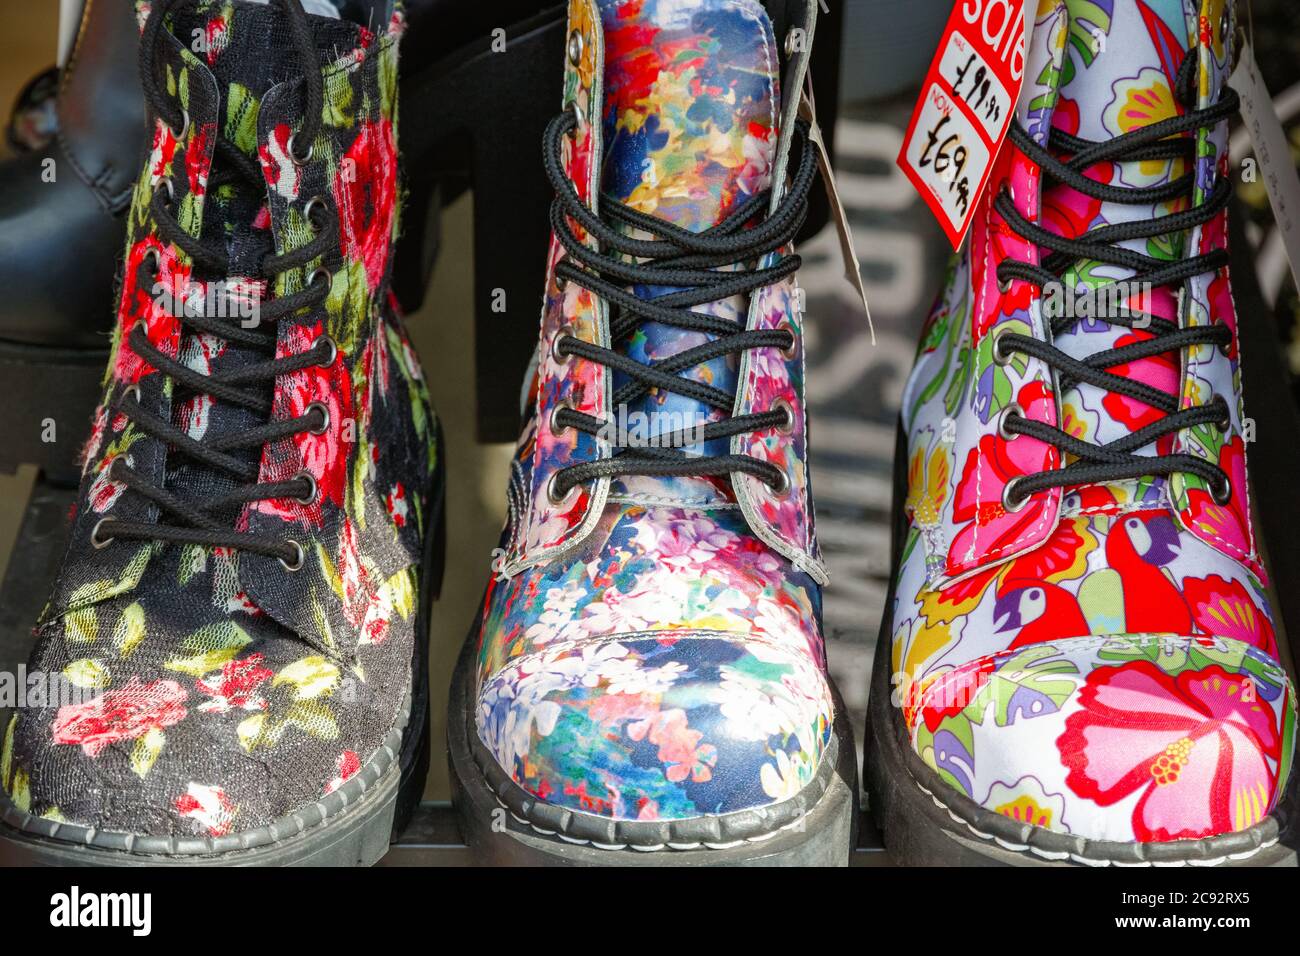 Floral boots on display at Camden market in London Stock Photo